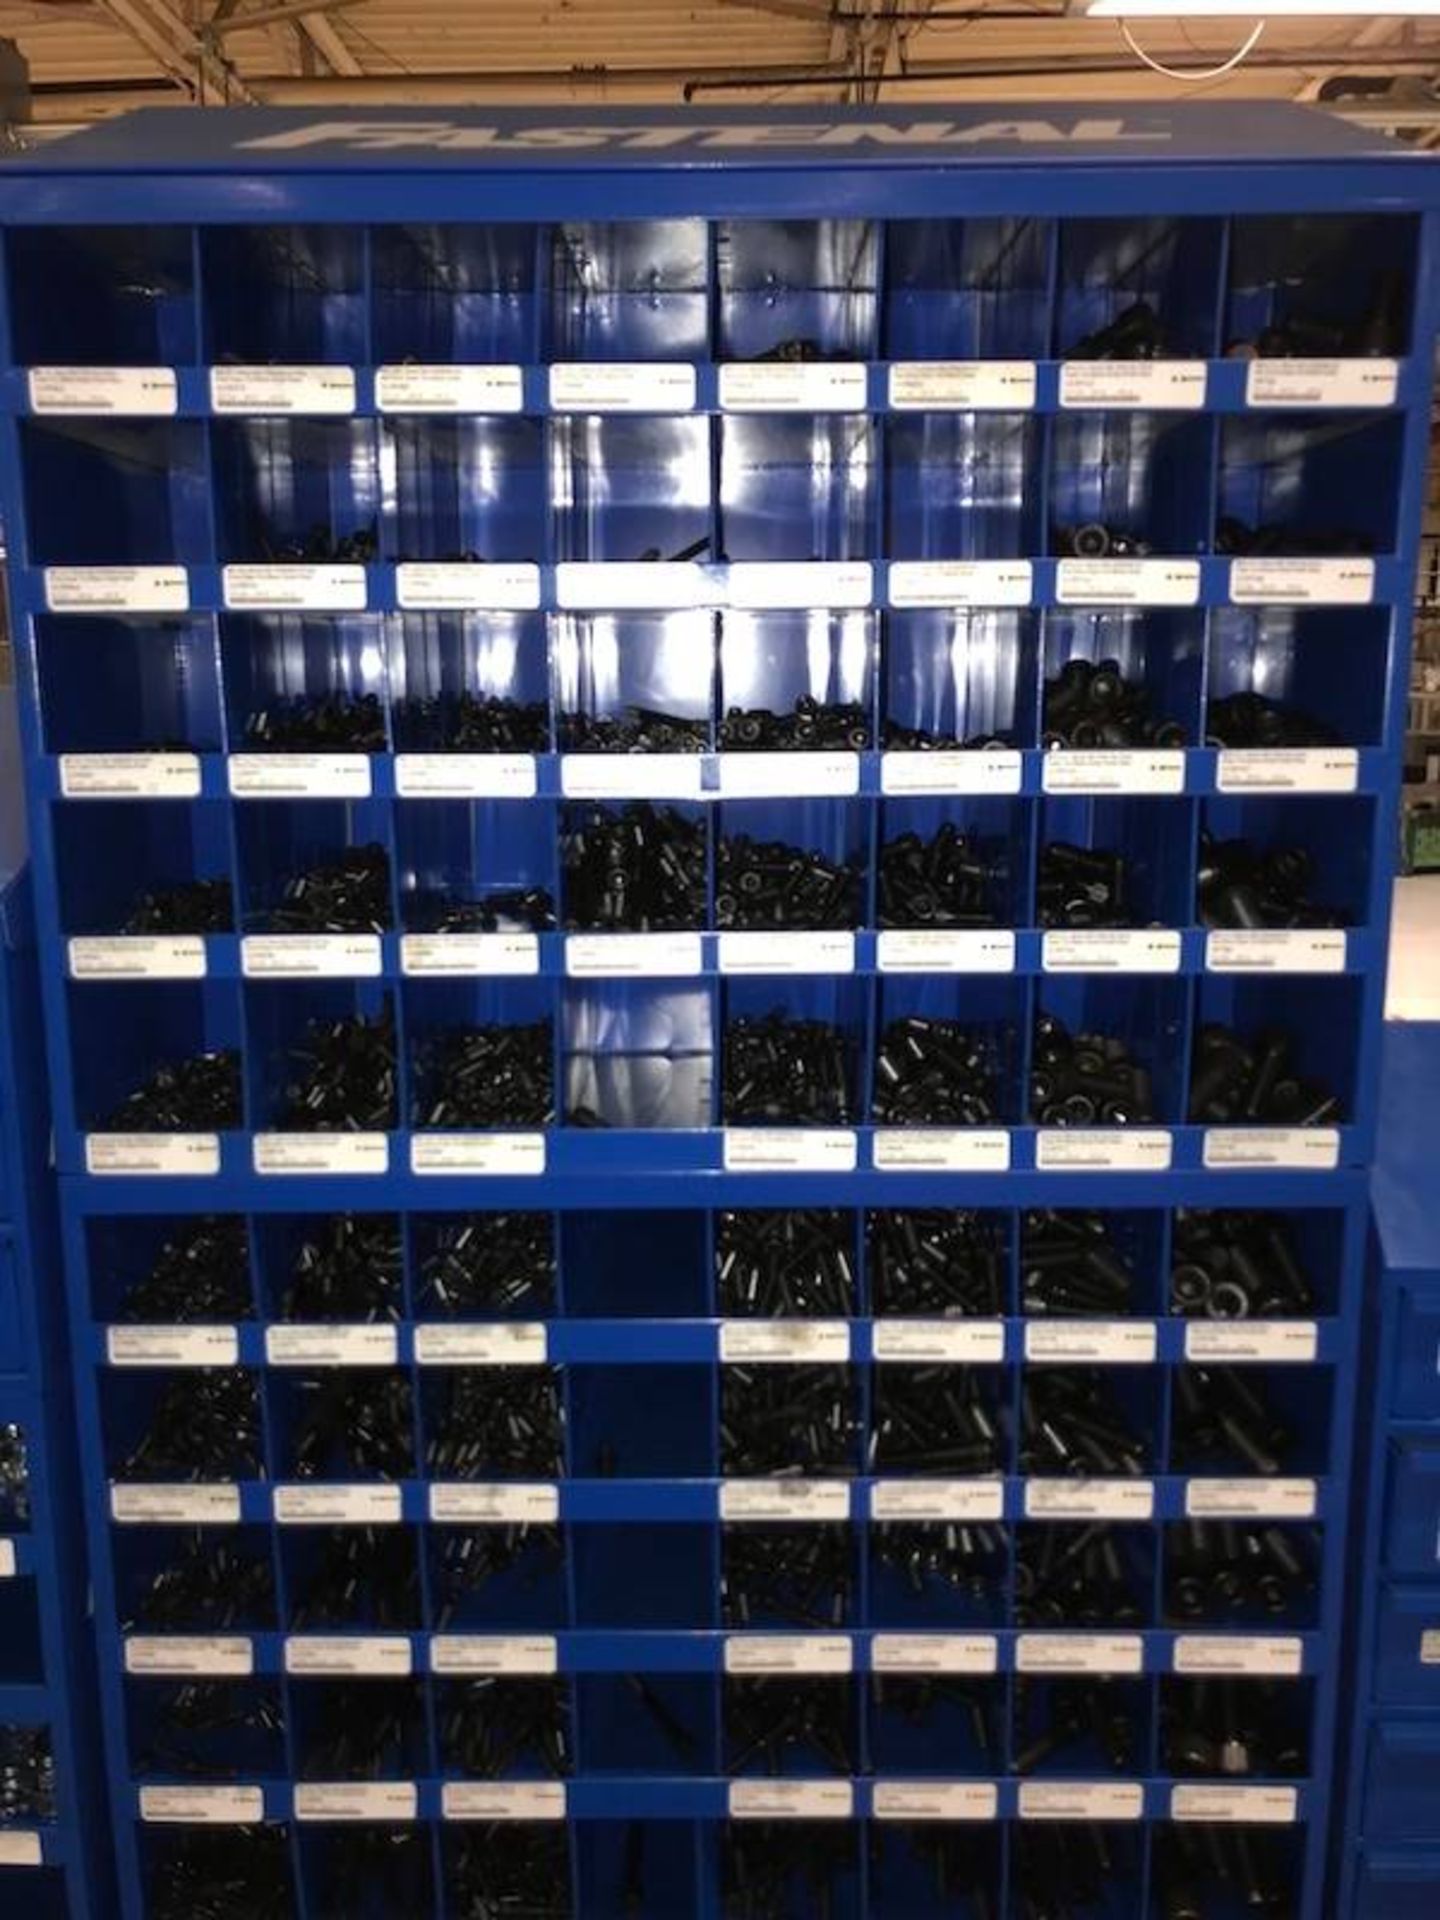 Contents of Fastenal Parts Bins - Image 67 of 70